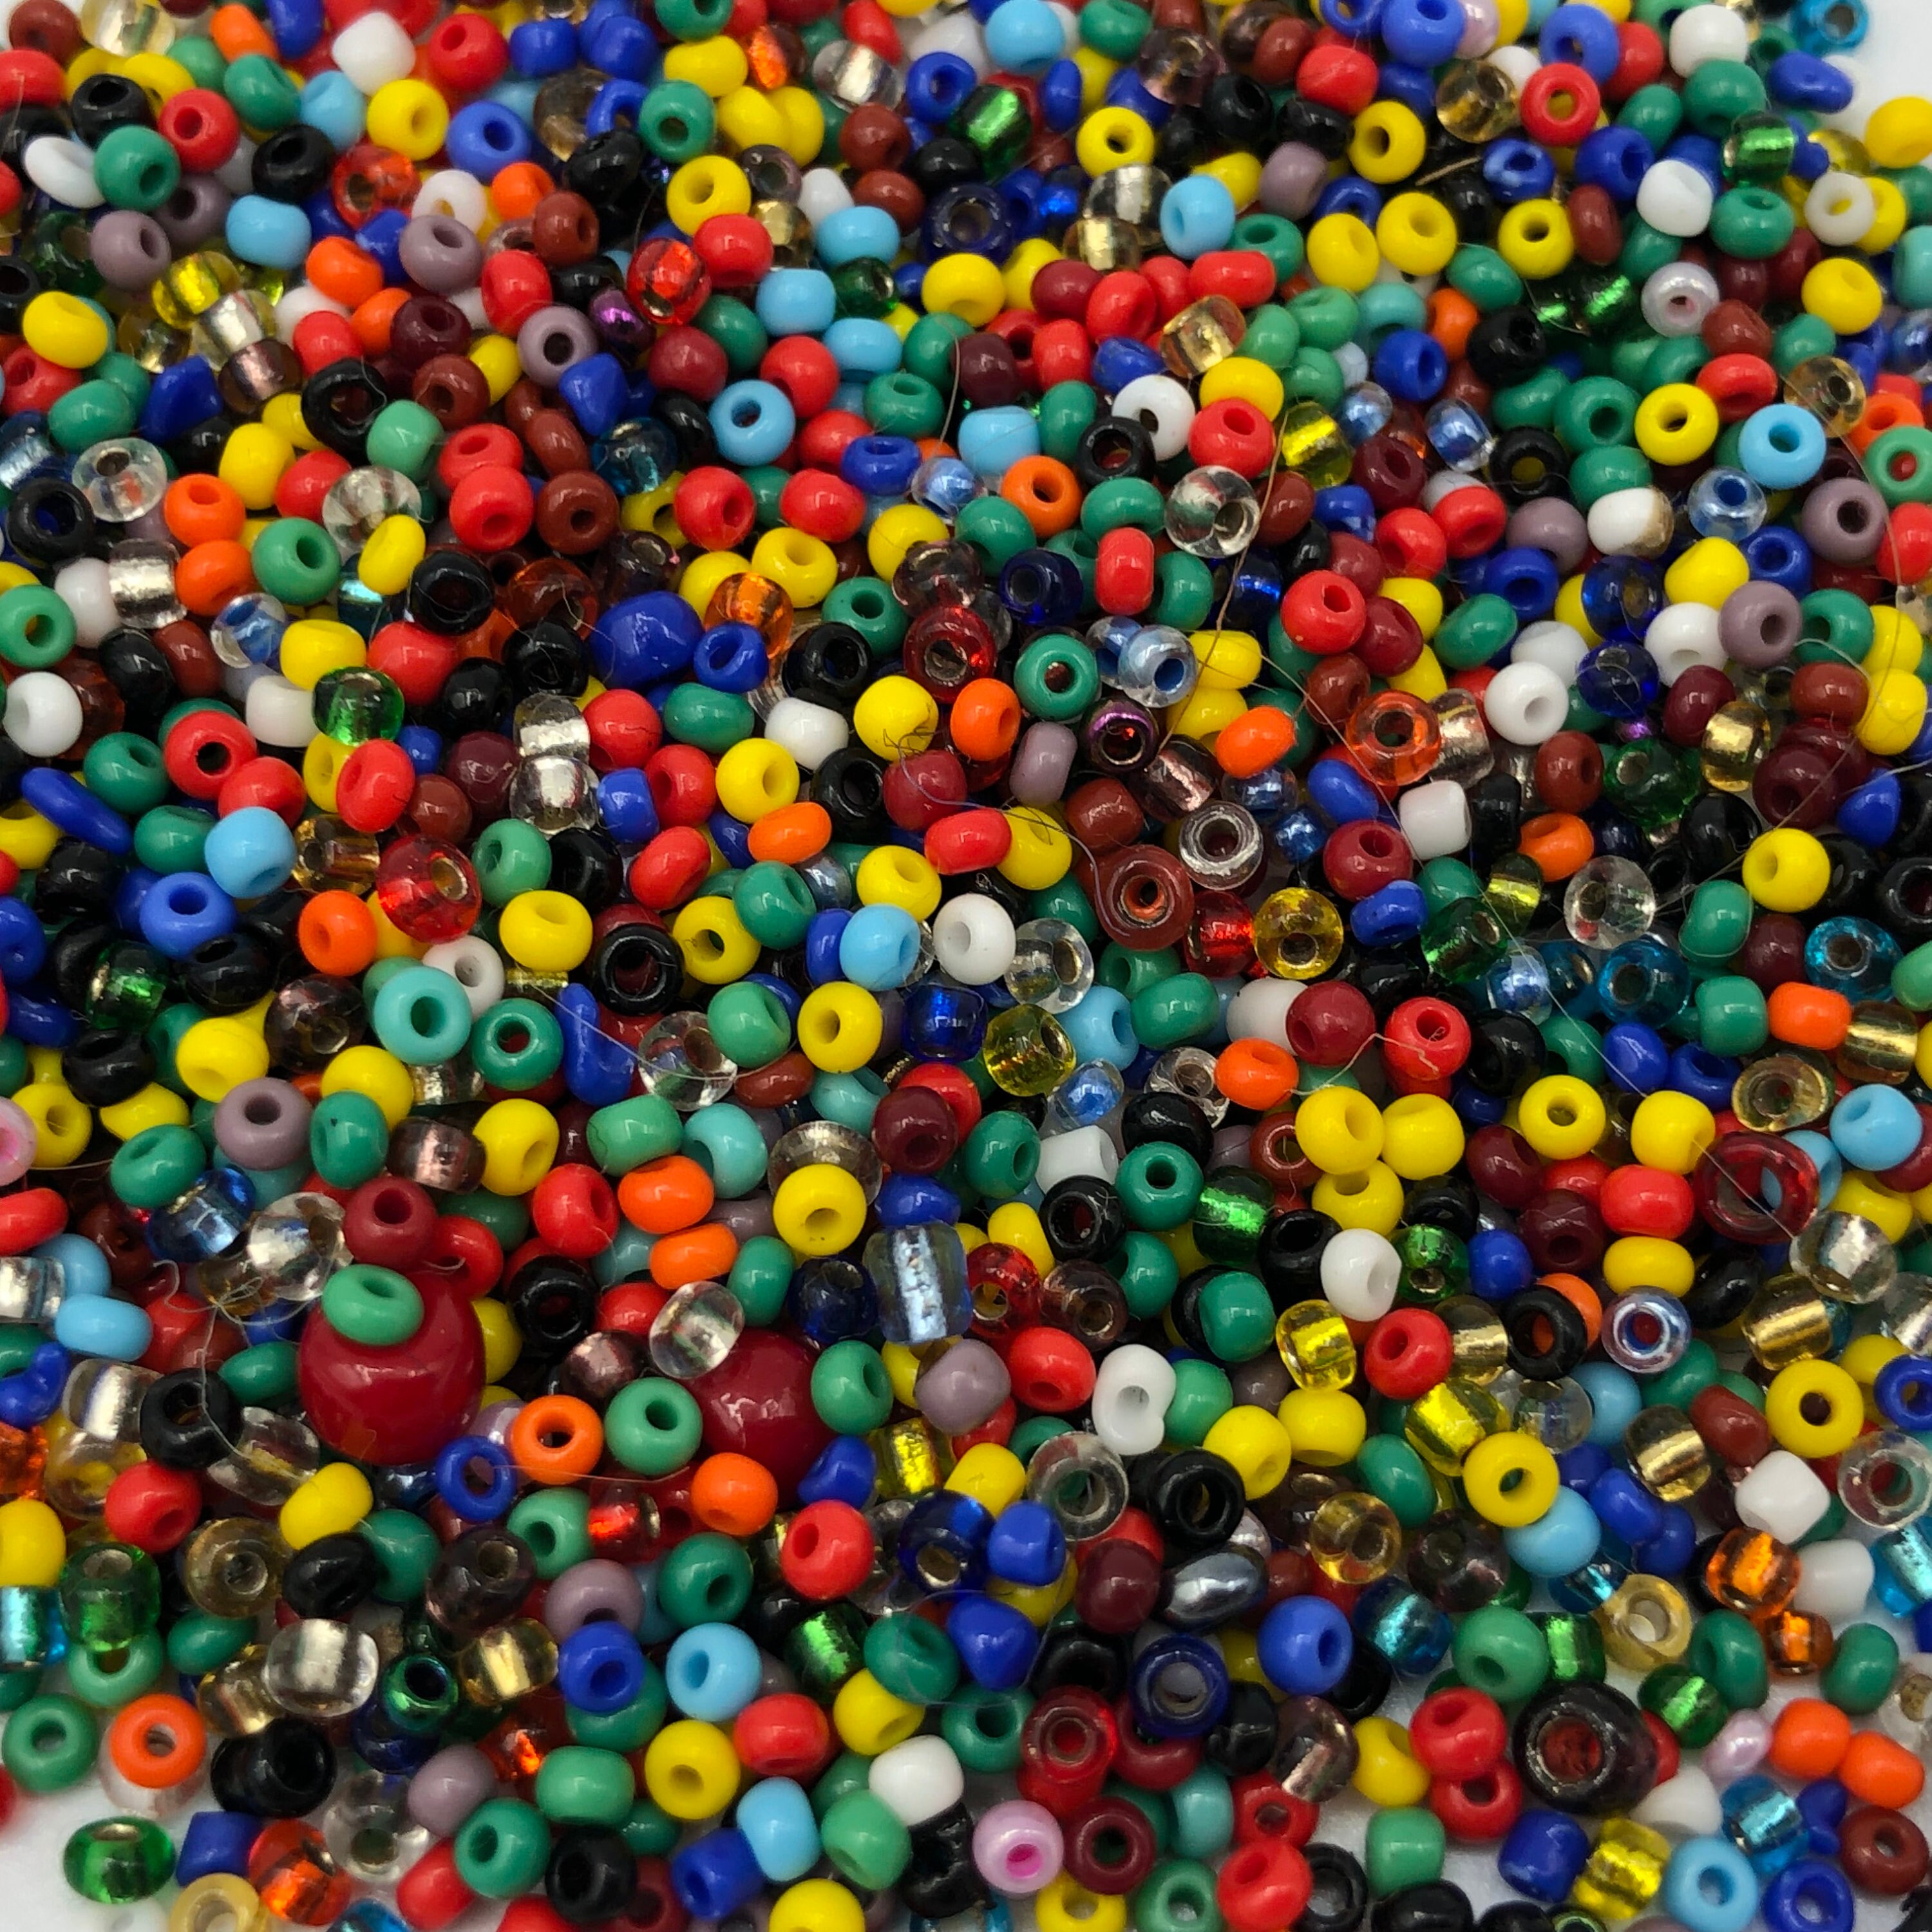 14mm Mixed Primary Colour Wood Beads 25 Pieces Round Wooden Craft